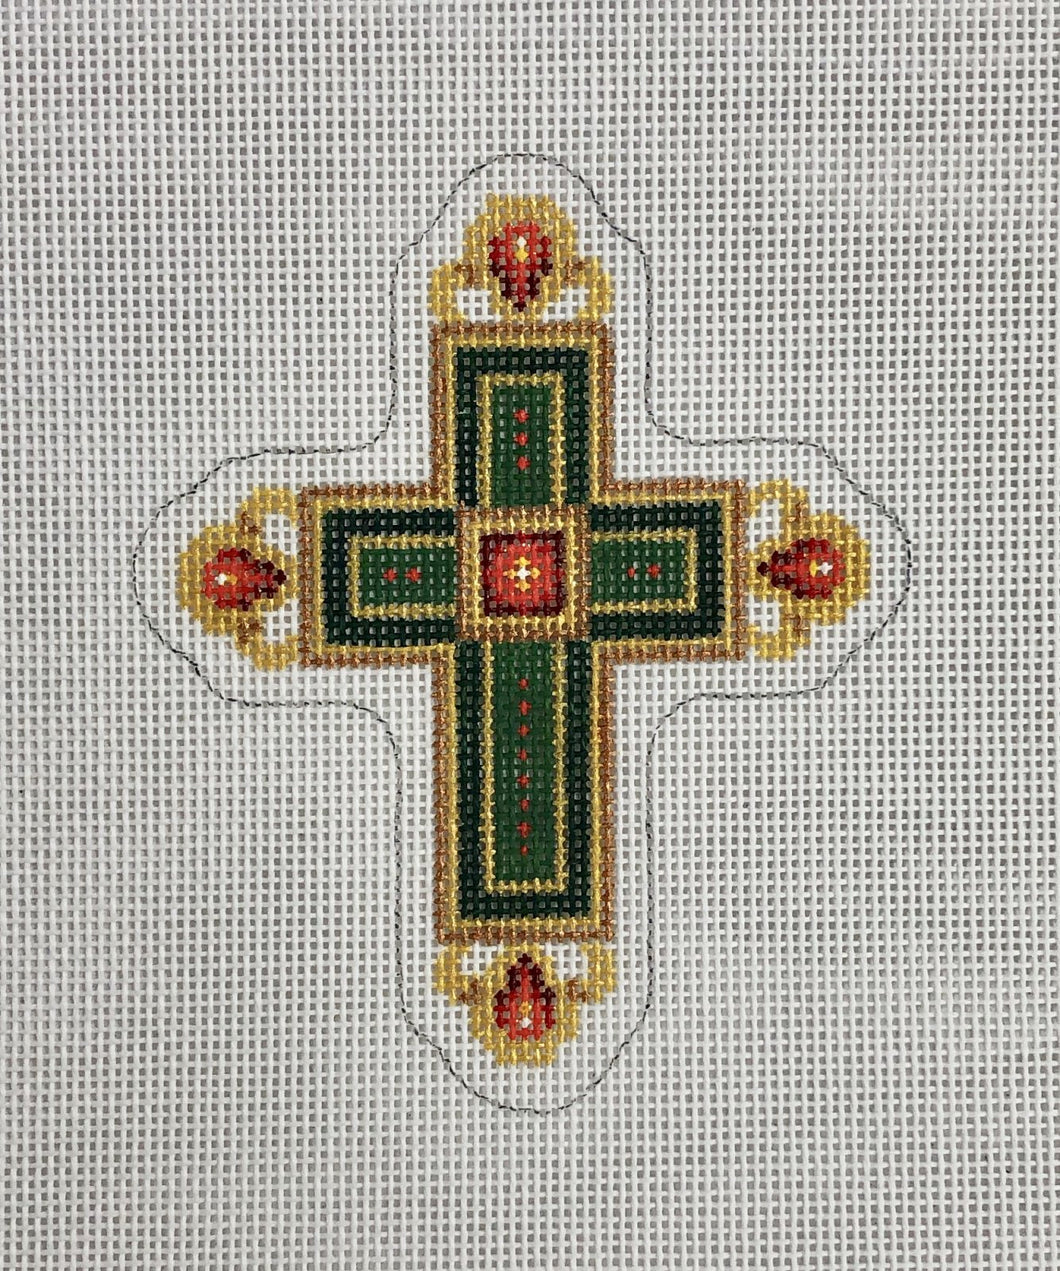 cross, green & gold with red jewels, ornament